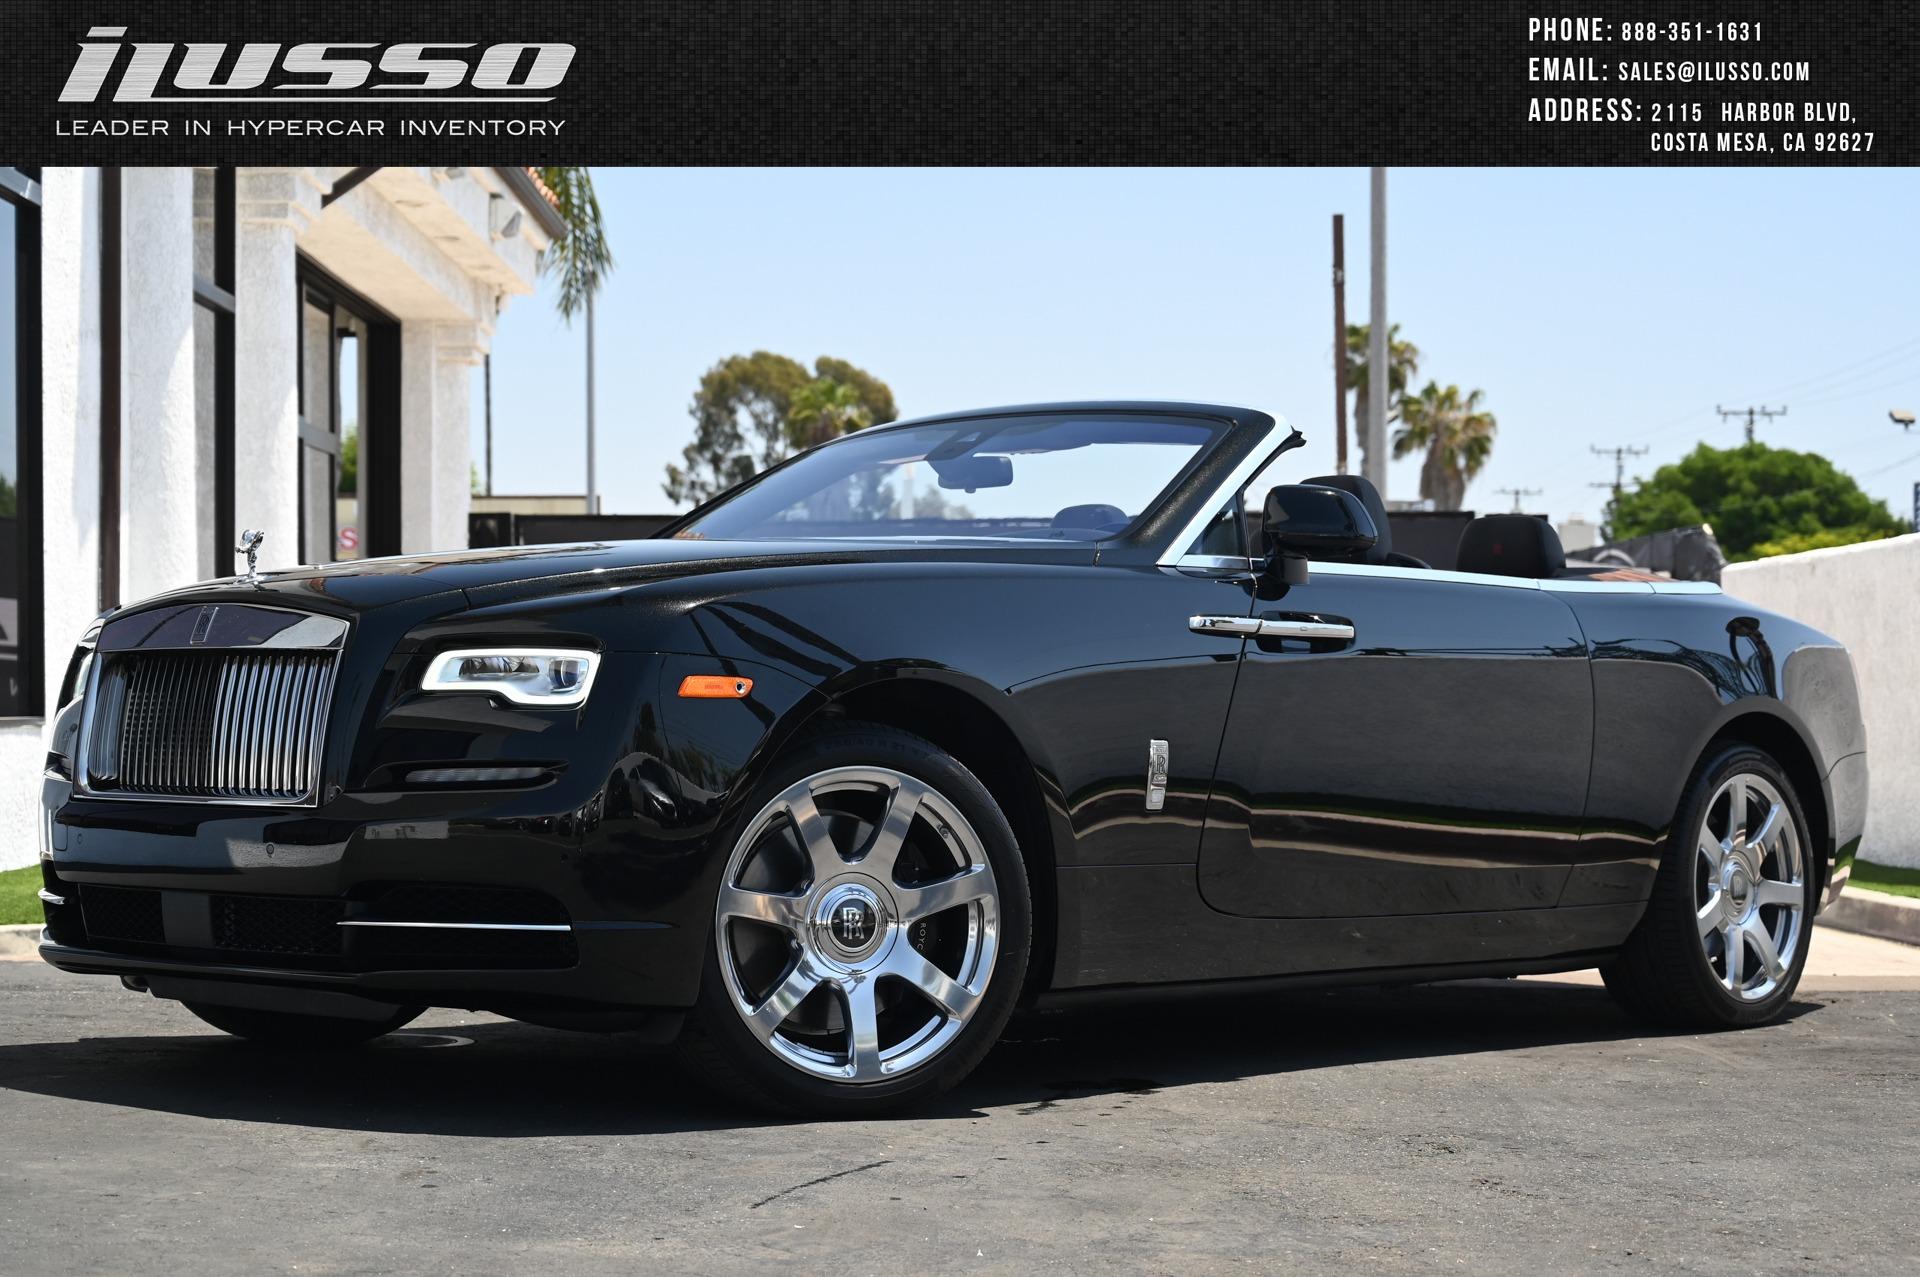 Used RollsRoyce Cars for Sale in South Gate CA  Carscom